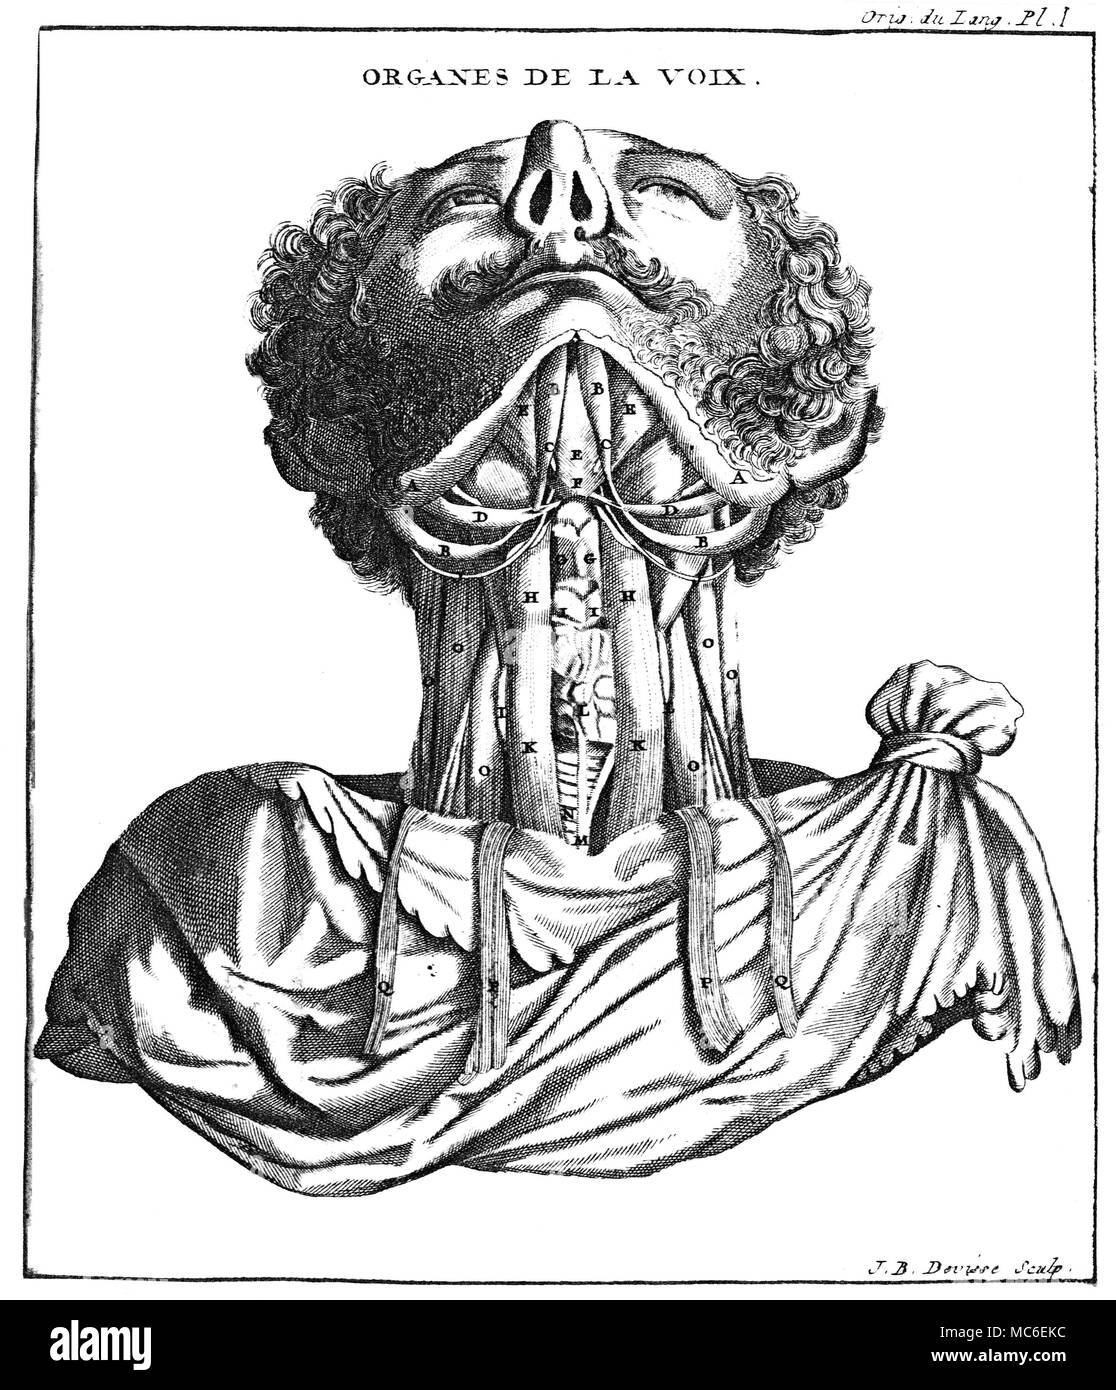 OCCULT PHYSIOGNOMY Engraving by Jean-Baptiste Devisse of what are called 'the organs of the voice', from Court de Gebelin, Le Monde Primitif, Analyse et Compare Avec le Monde Moderne, 1789. Stock Photo